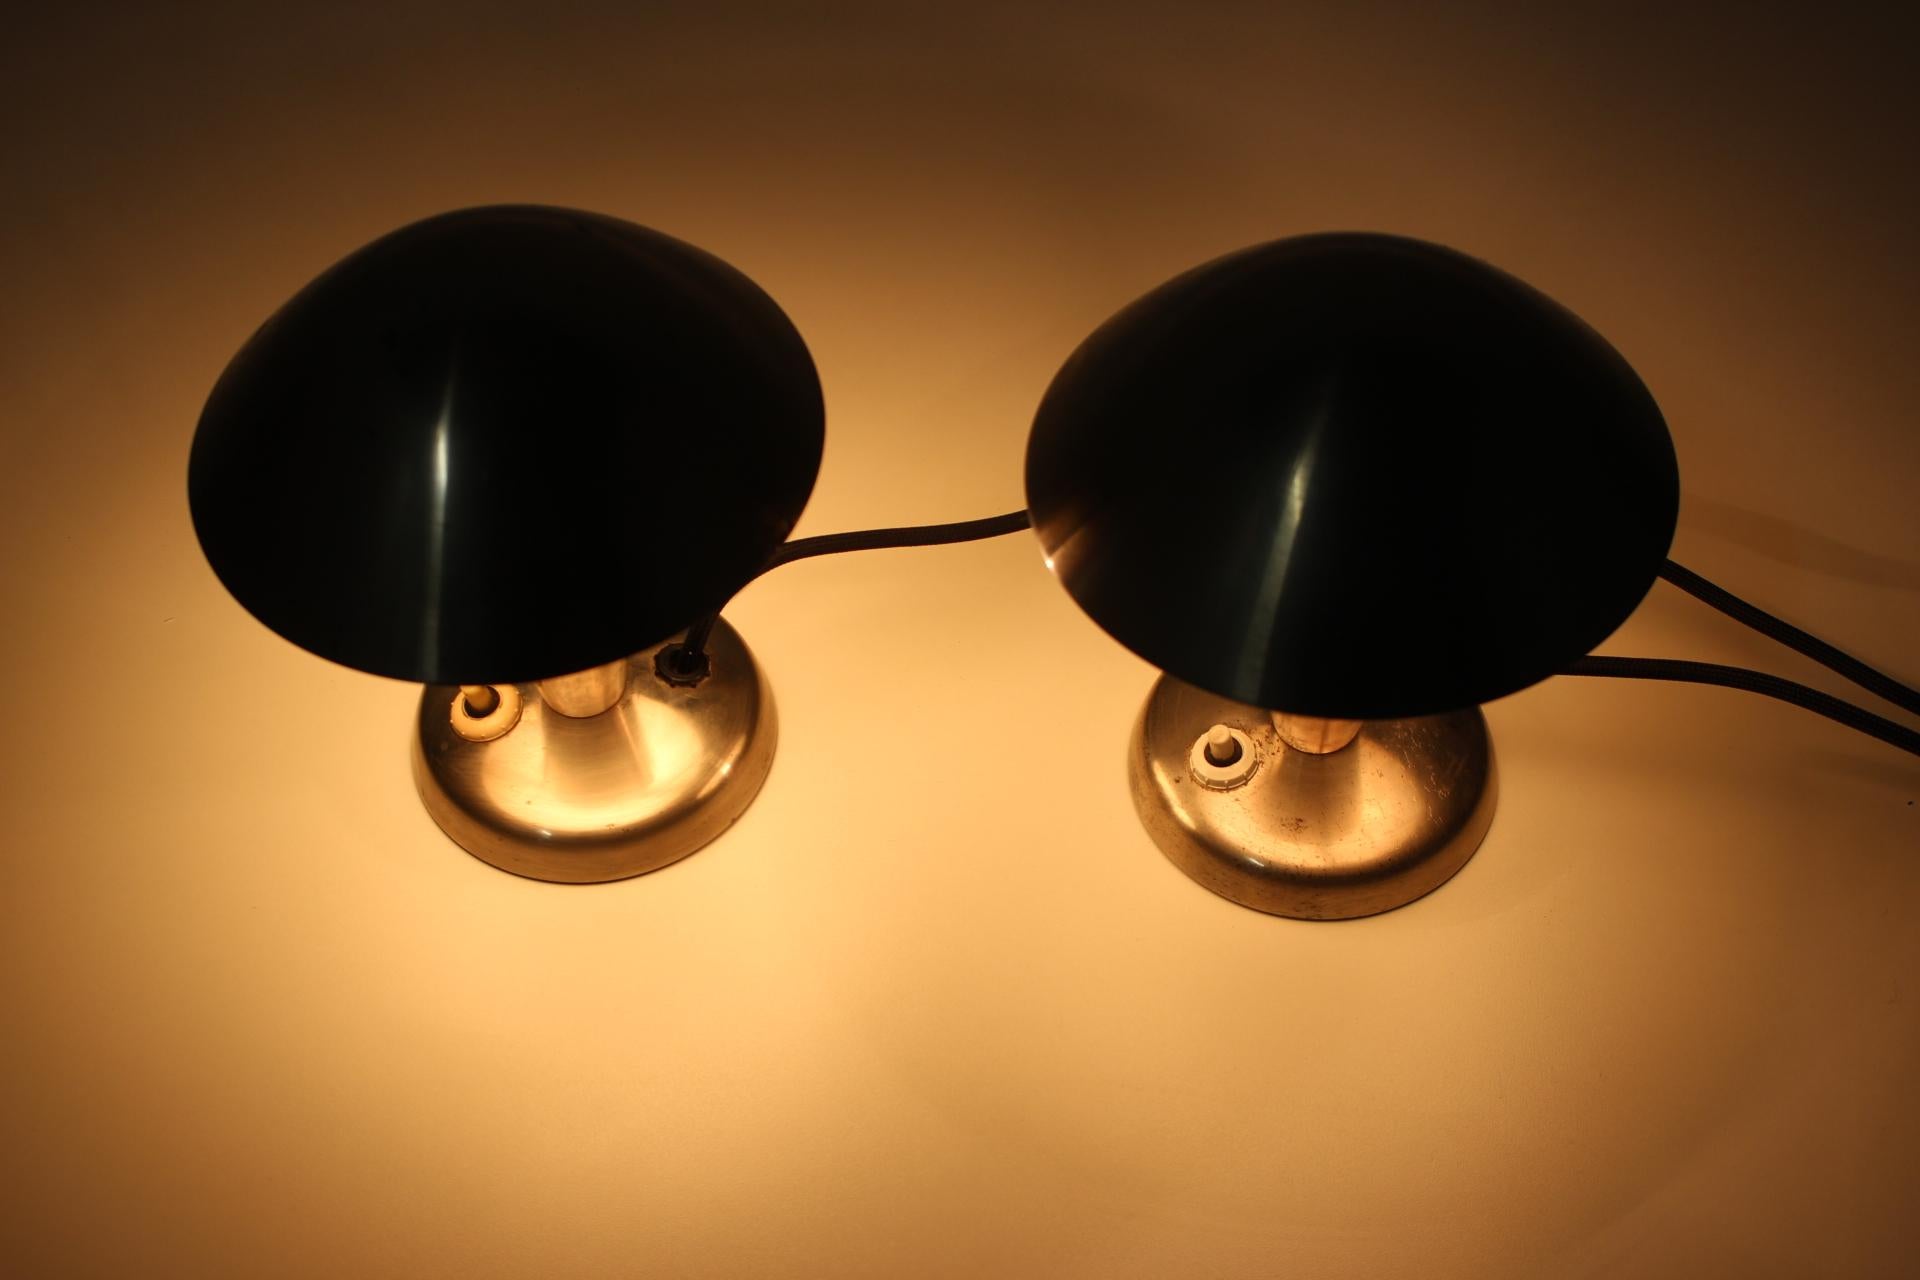 Mid-20th Century 1930s Pair of Chrome Plated Bauhaus Lamps, Czechoslovakia For Sale